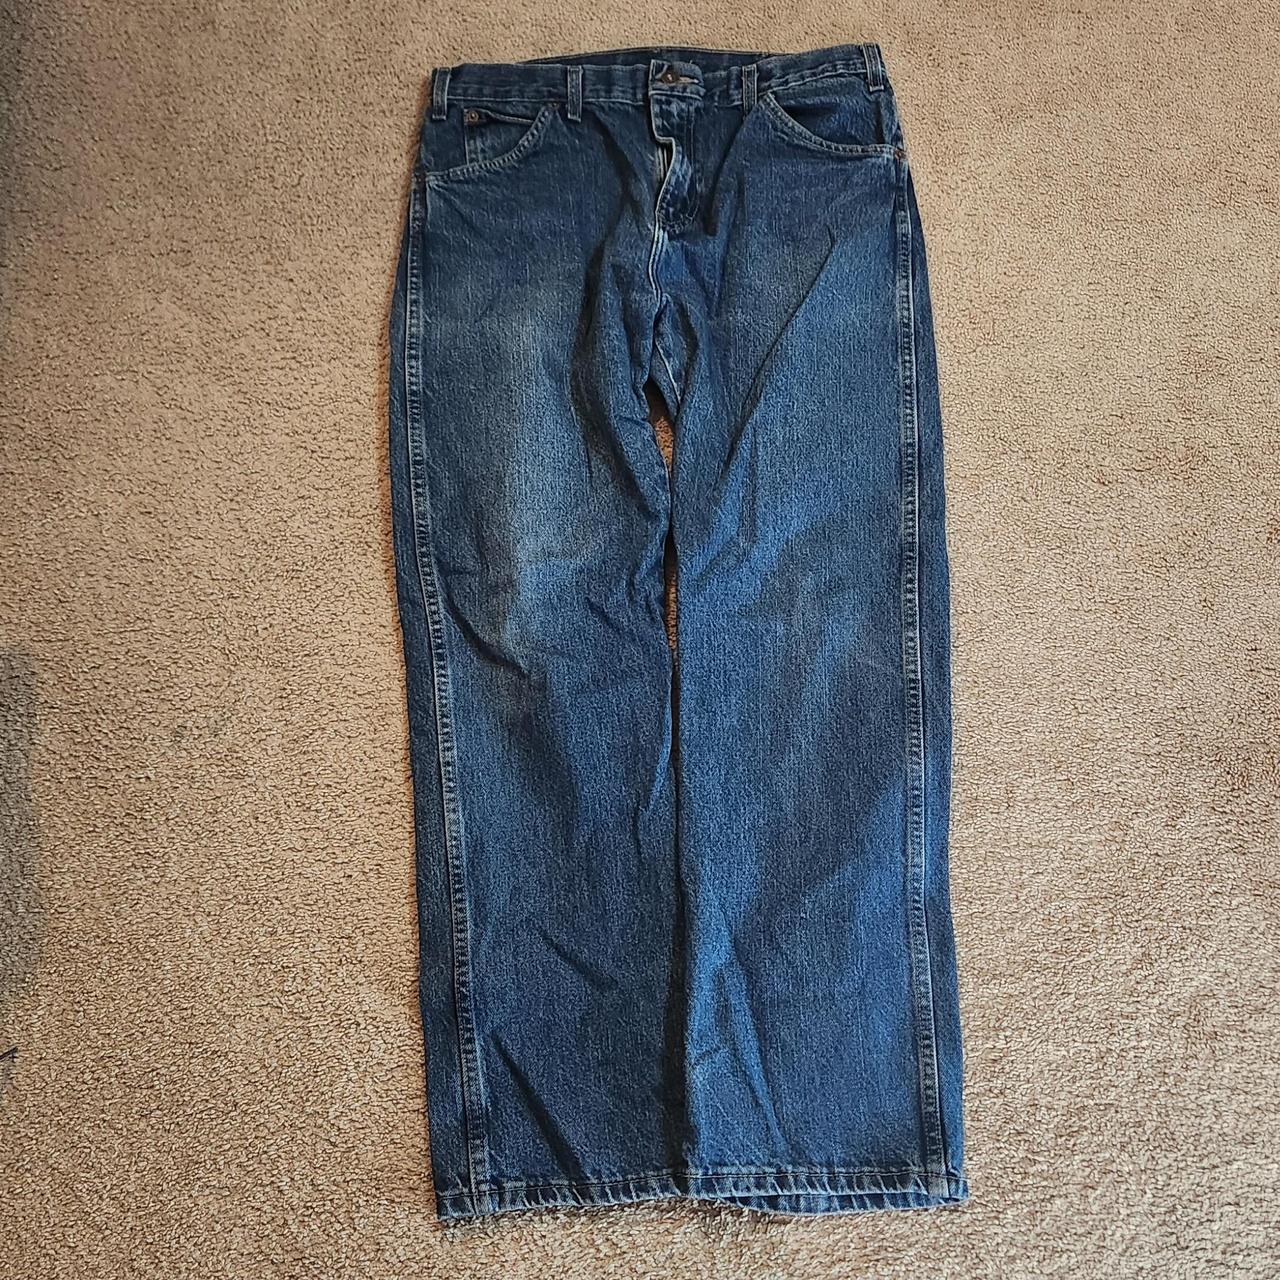 32x30 dickes jeans. All flaws in pictures lmk any... - Depop